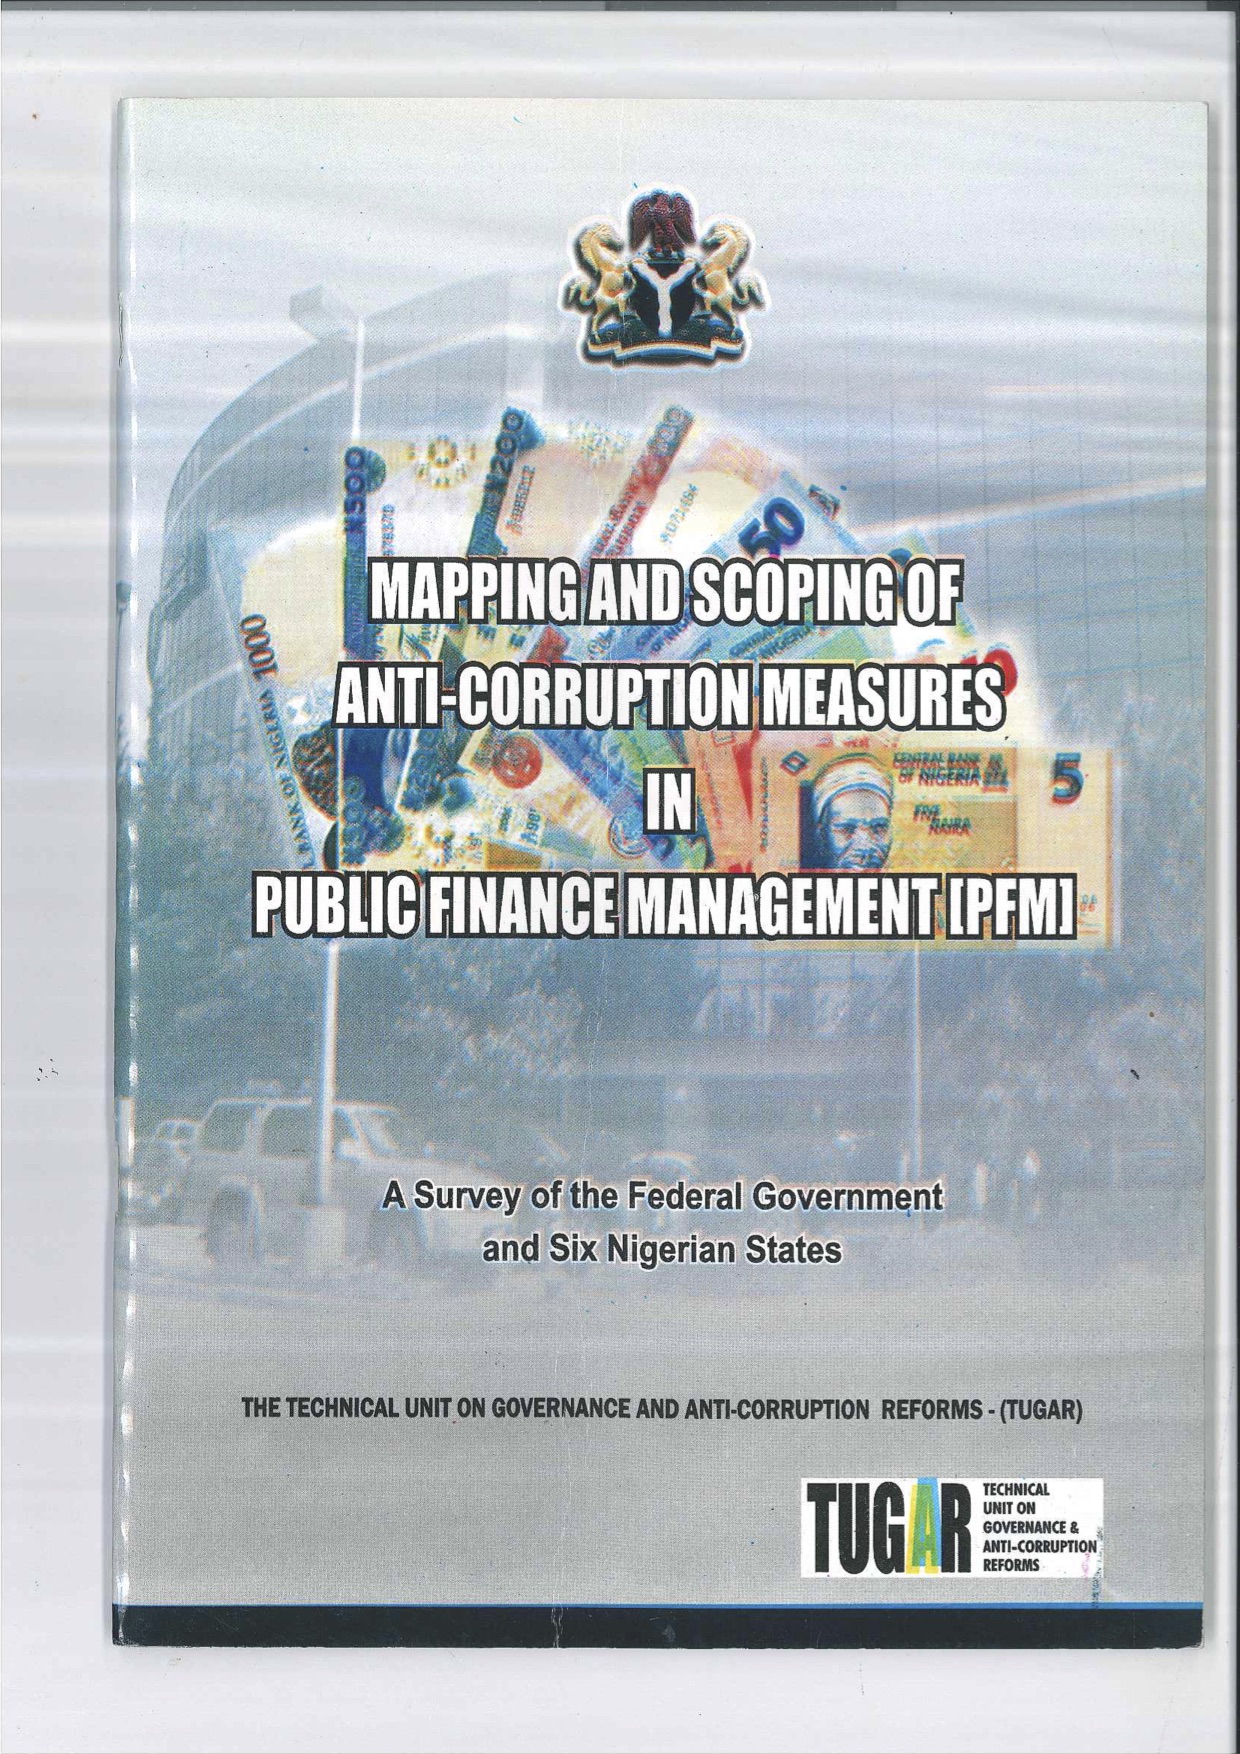 Mapping and Scoping of Anti-Corruption Measures in Public Finance Management [PFM]: A Survey of the Federal Government and Six Nigerian States